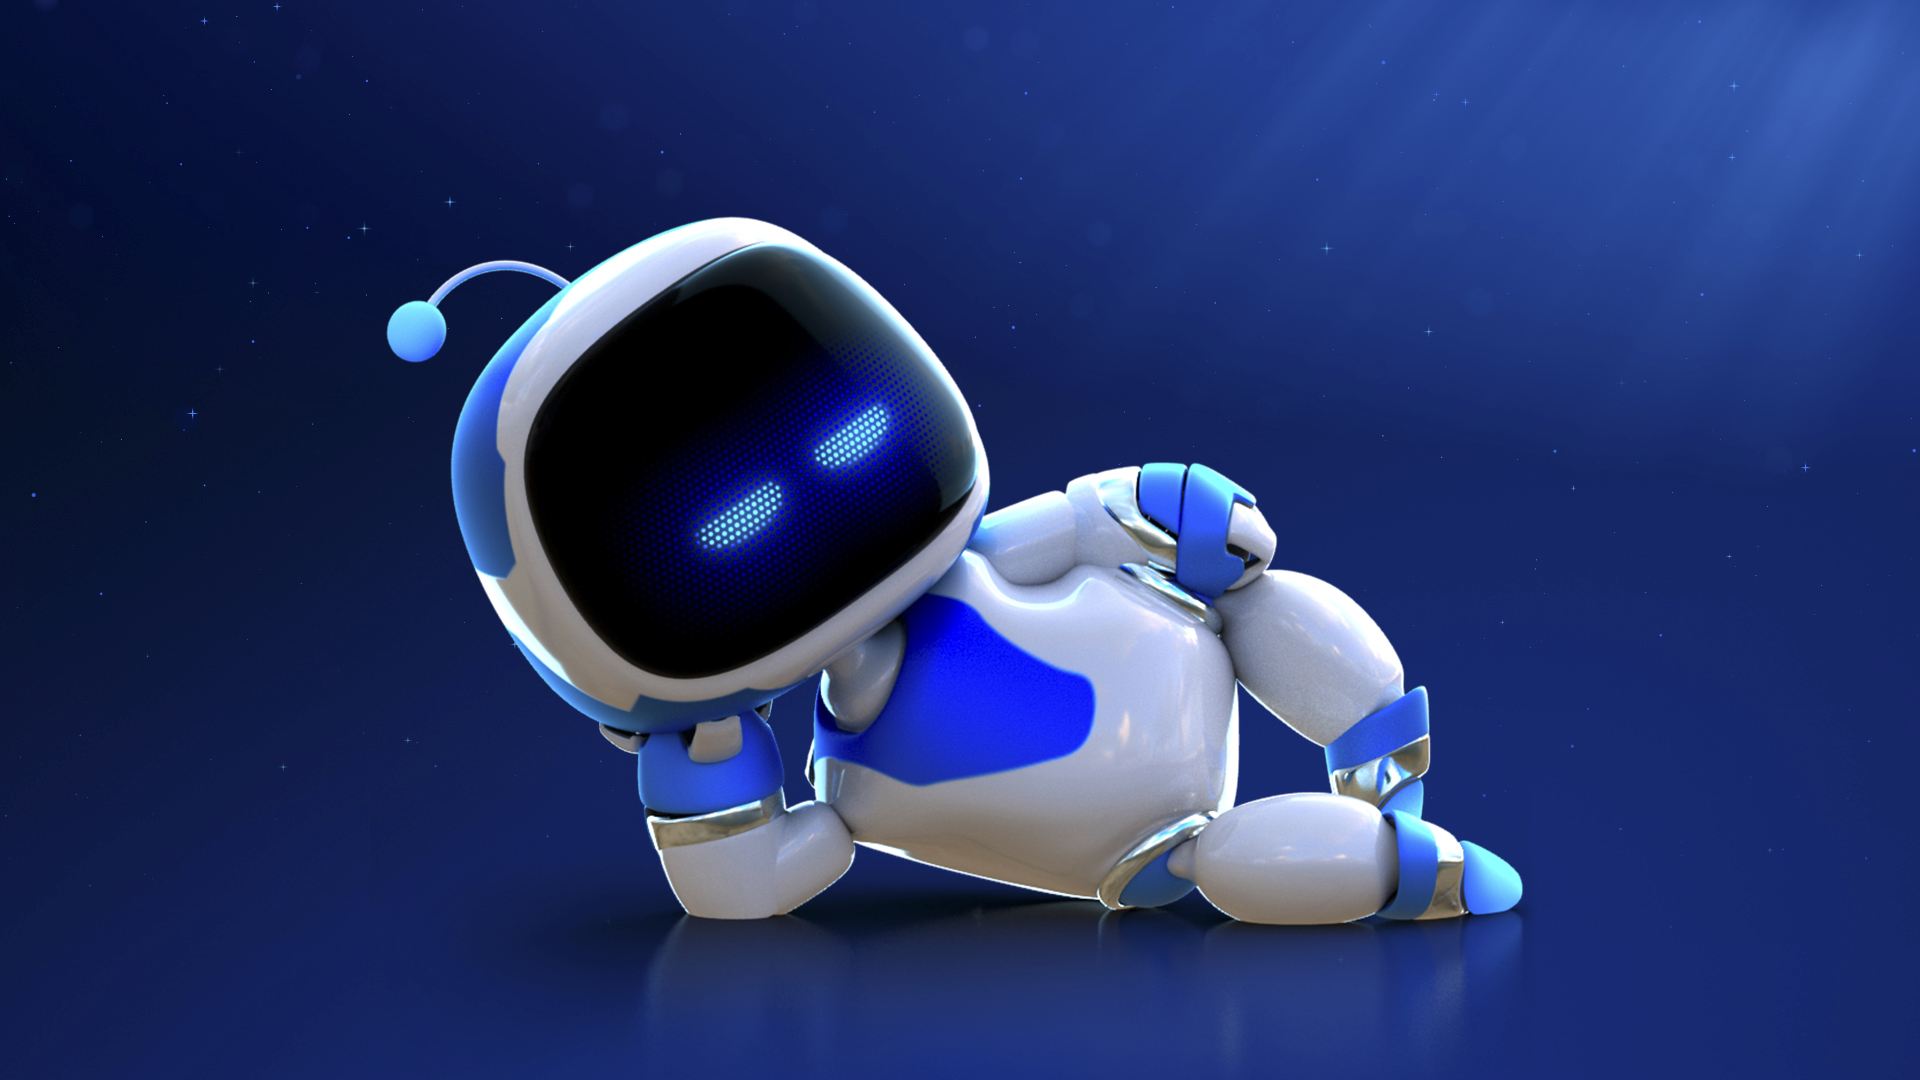 Astro Bot Wallpapers Wallpaper Cave